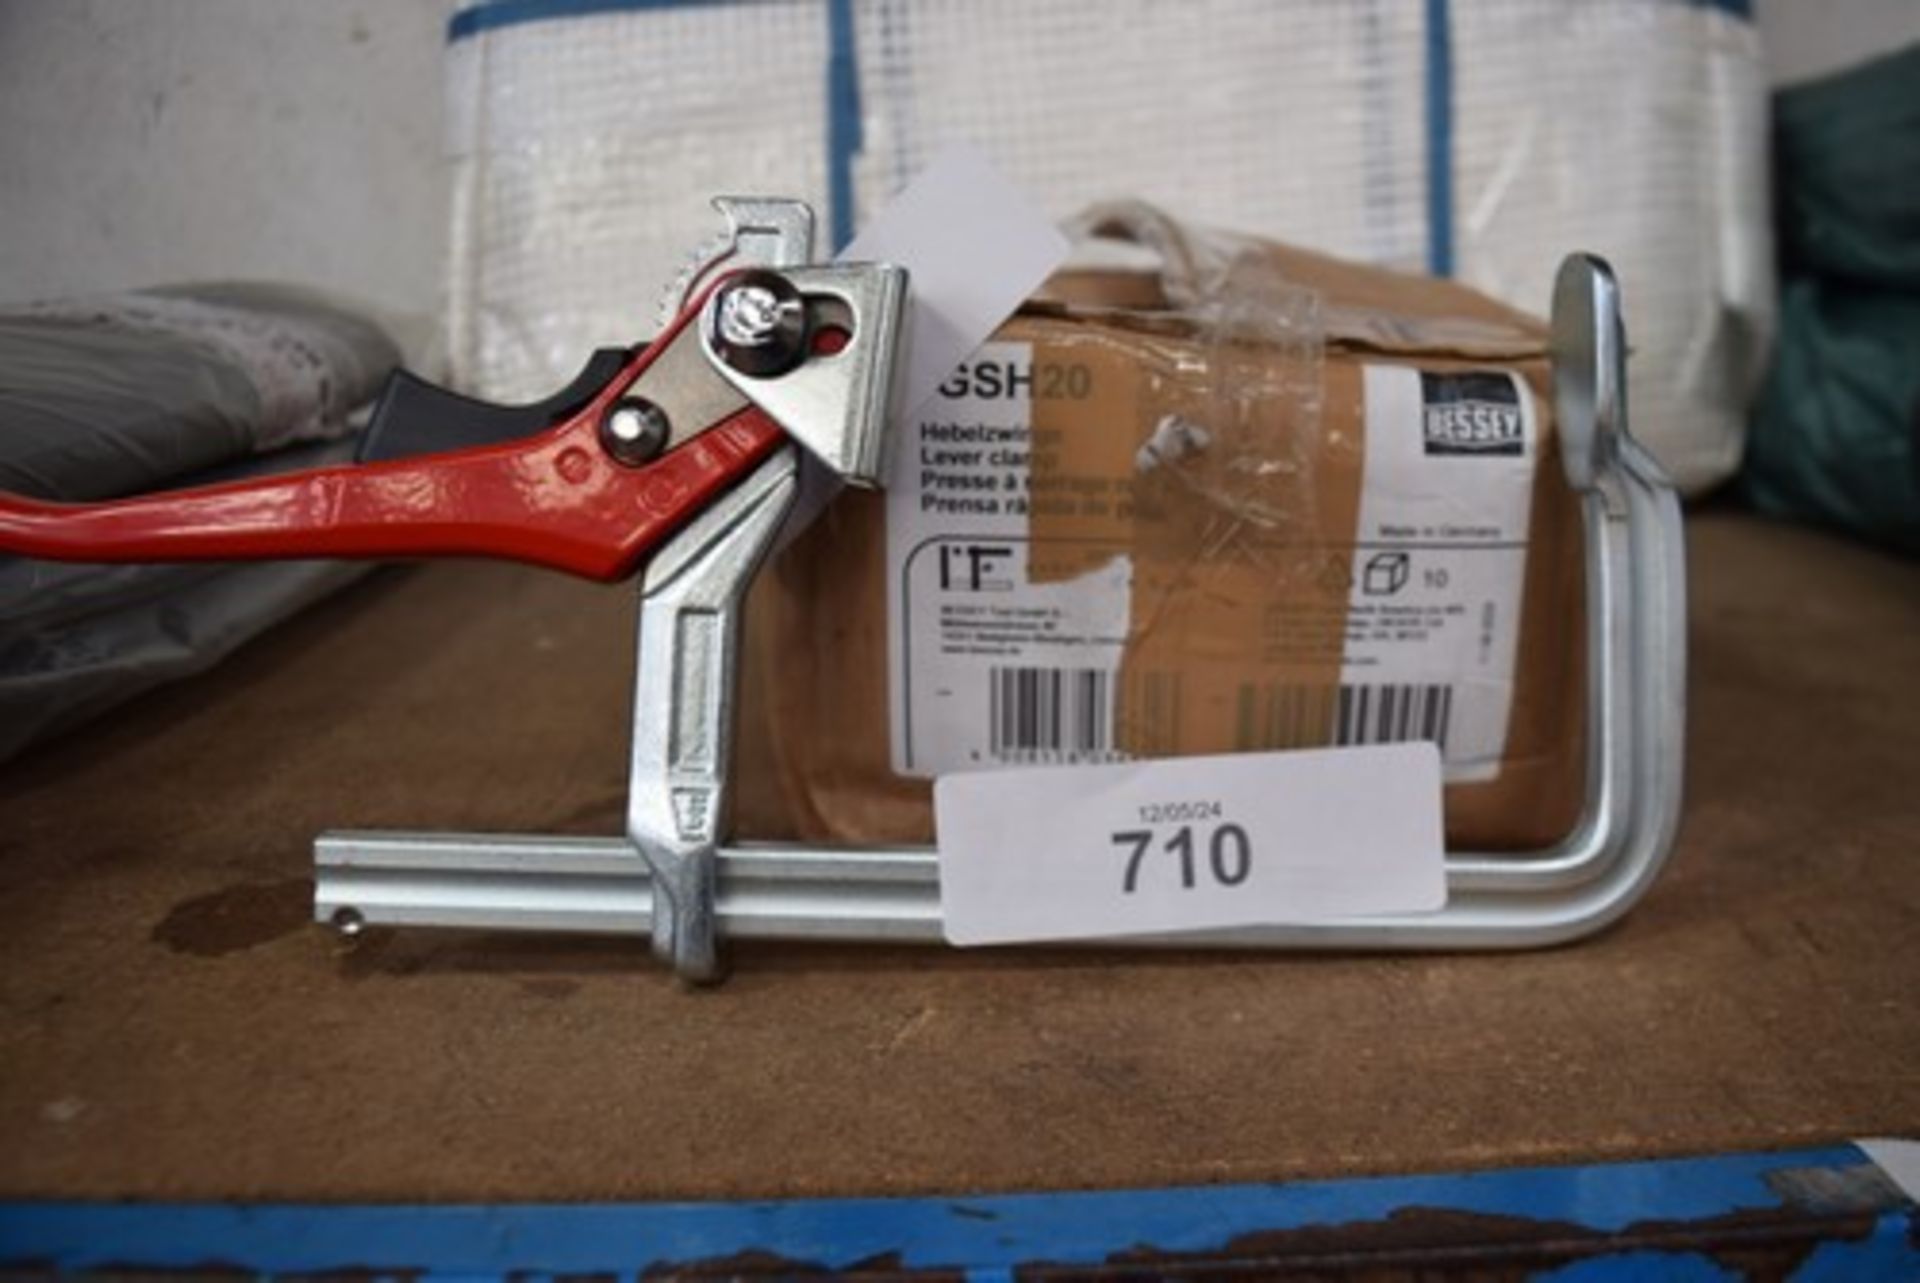 10 x Bessey lever clamps, model: GSH20 - new (GS1)